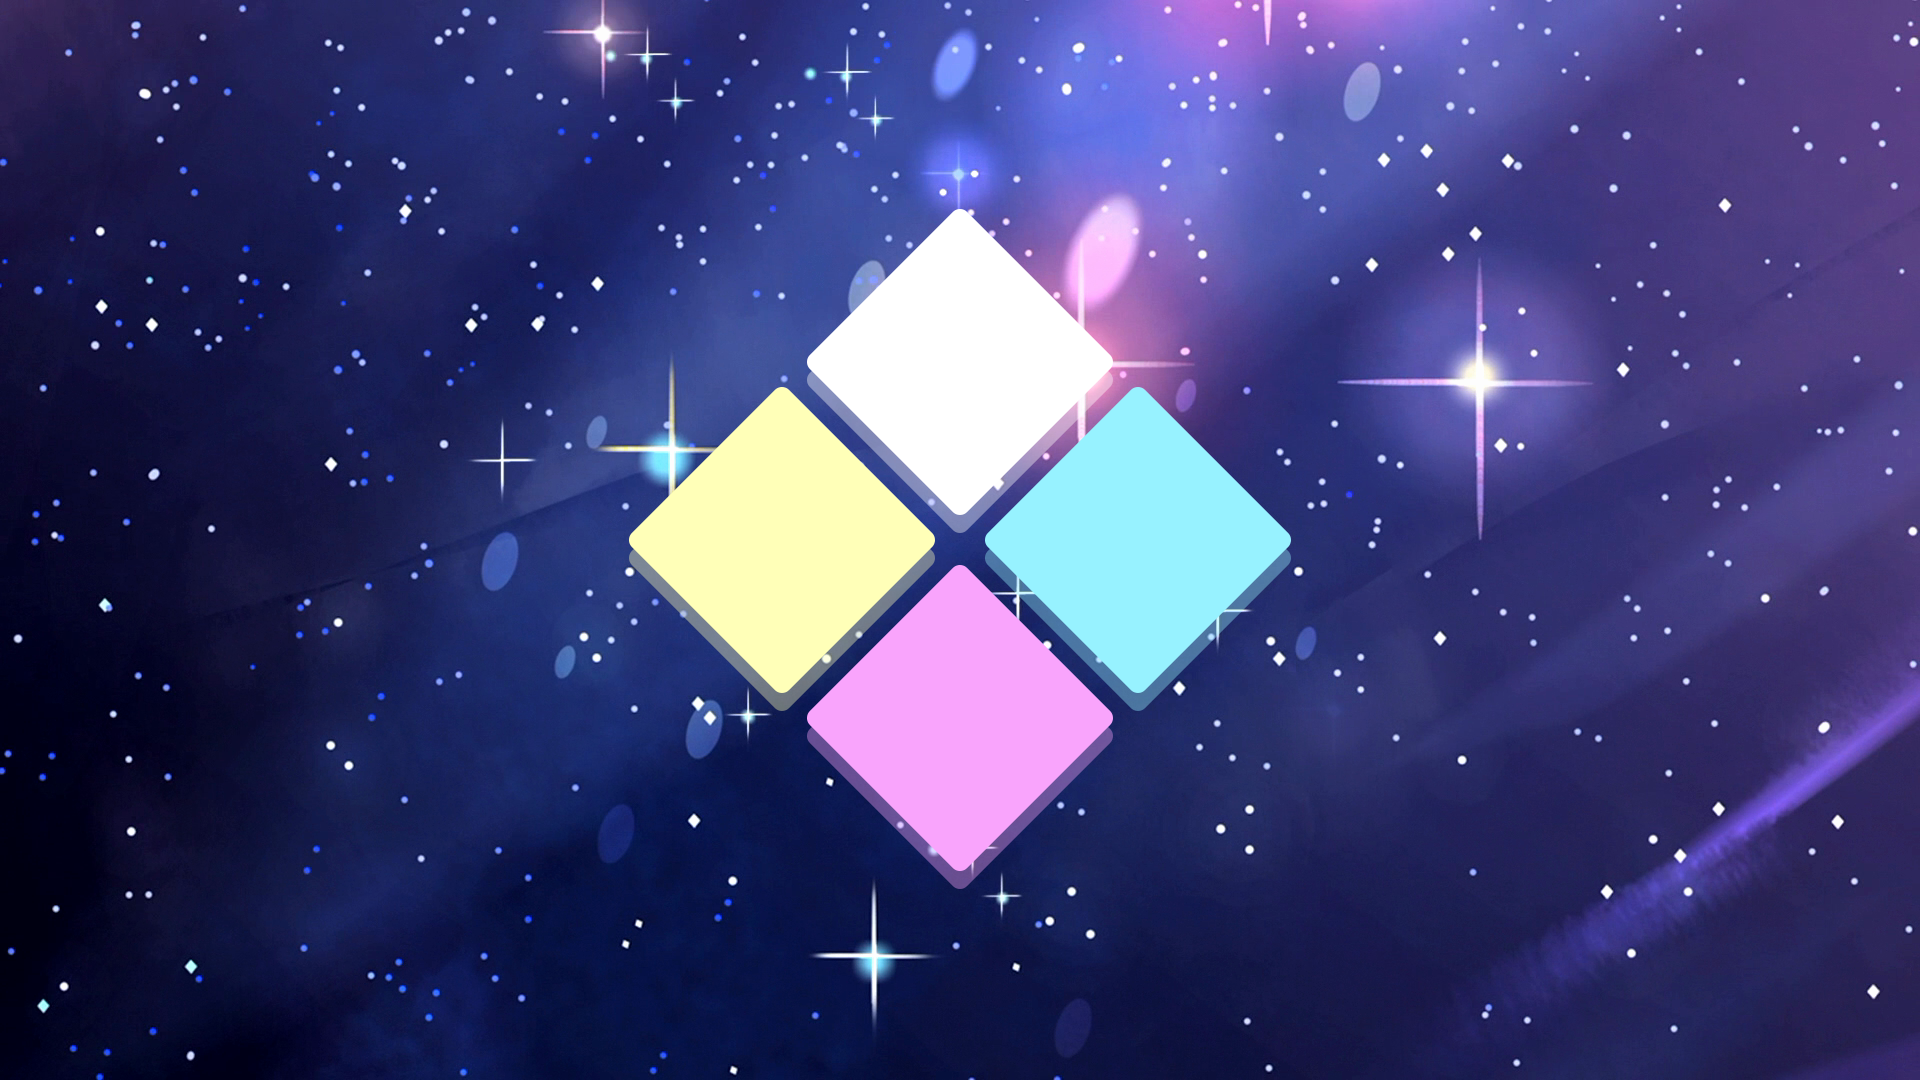 I remade a cool diamond authority desktop background i found on google in 1080p